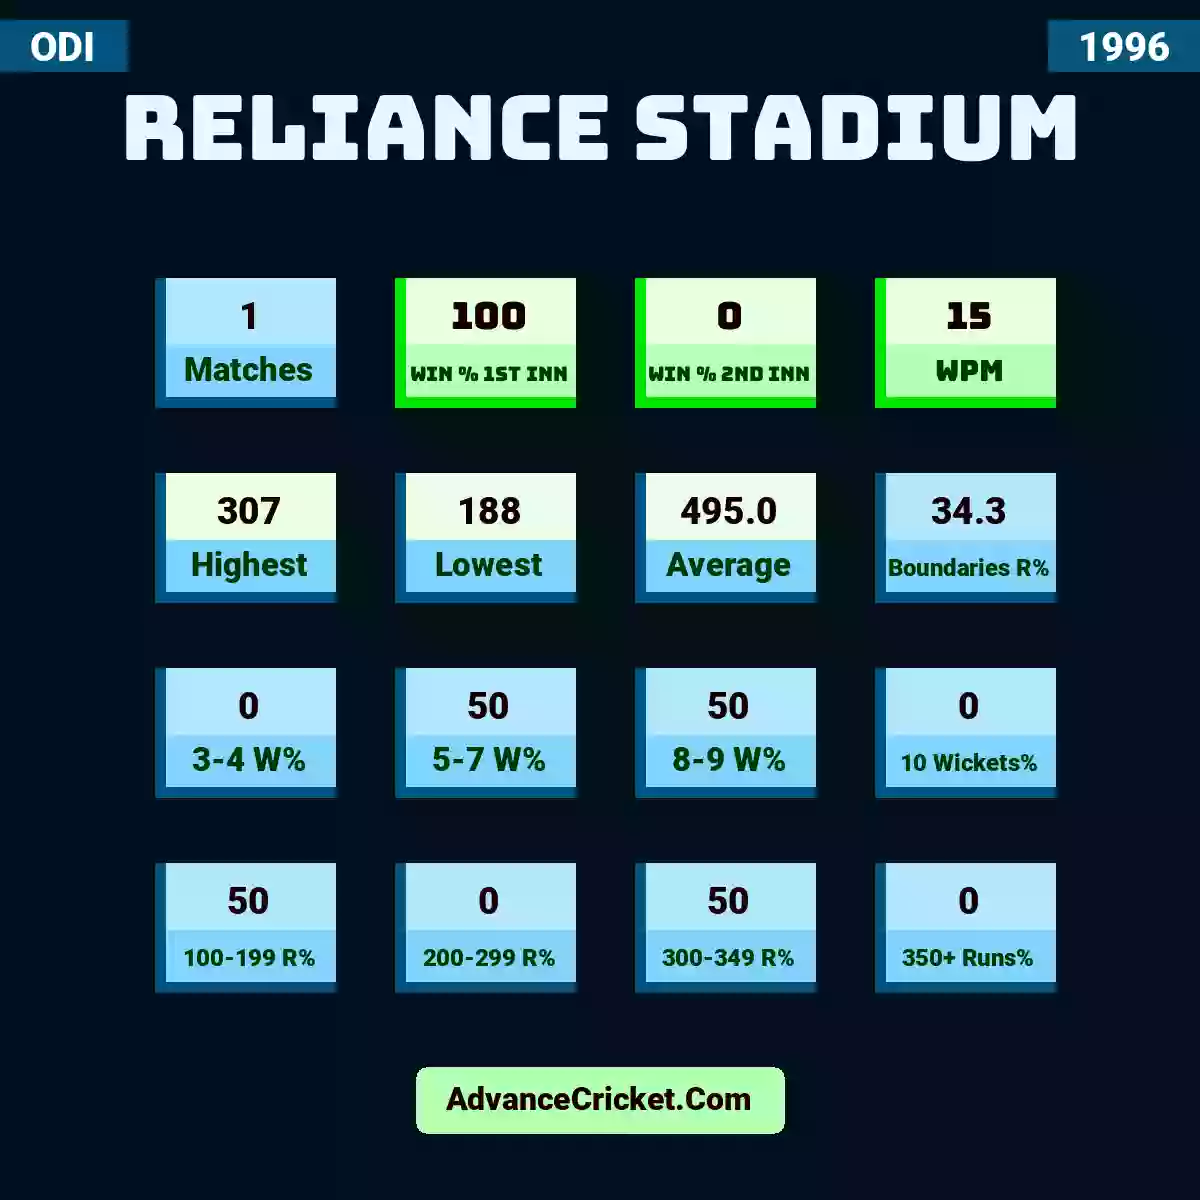 Image showing Reliance Stadium with Matches: 1, Win % 1st Inn: 100, Win % 2nd Inn: 0, WPM: 15, Highest: 307, Lowest: 188, Average: 495.0, Boundaries R%: 34.3, 3-4 W%: 0, 5-7 W%: 50, 8-9 W%: 50, 10 Wickets%: 0, 100-199 R%: 50, 200-299 R%: 0, 300-349 R%: 50, 350+ Runs%: 0.